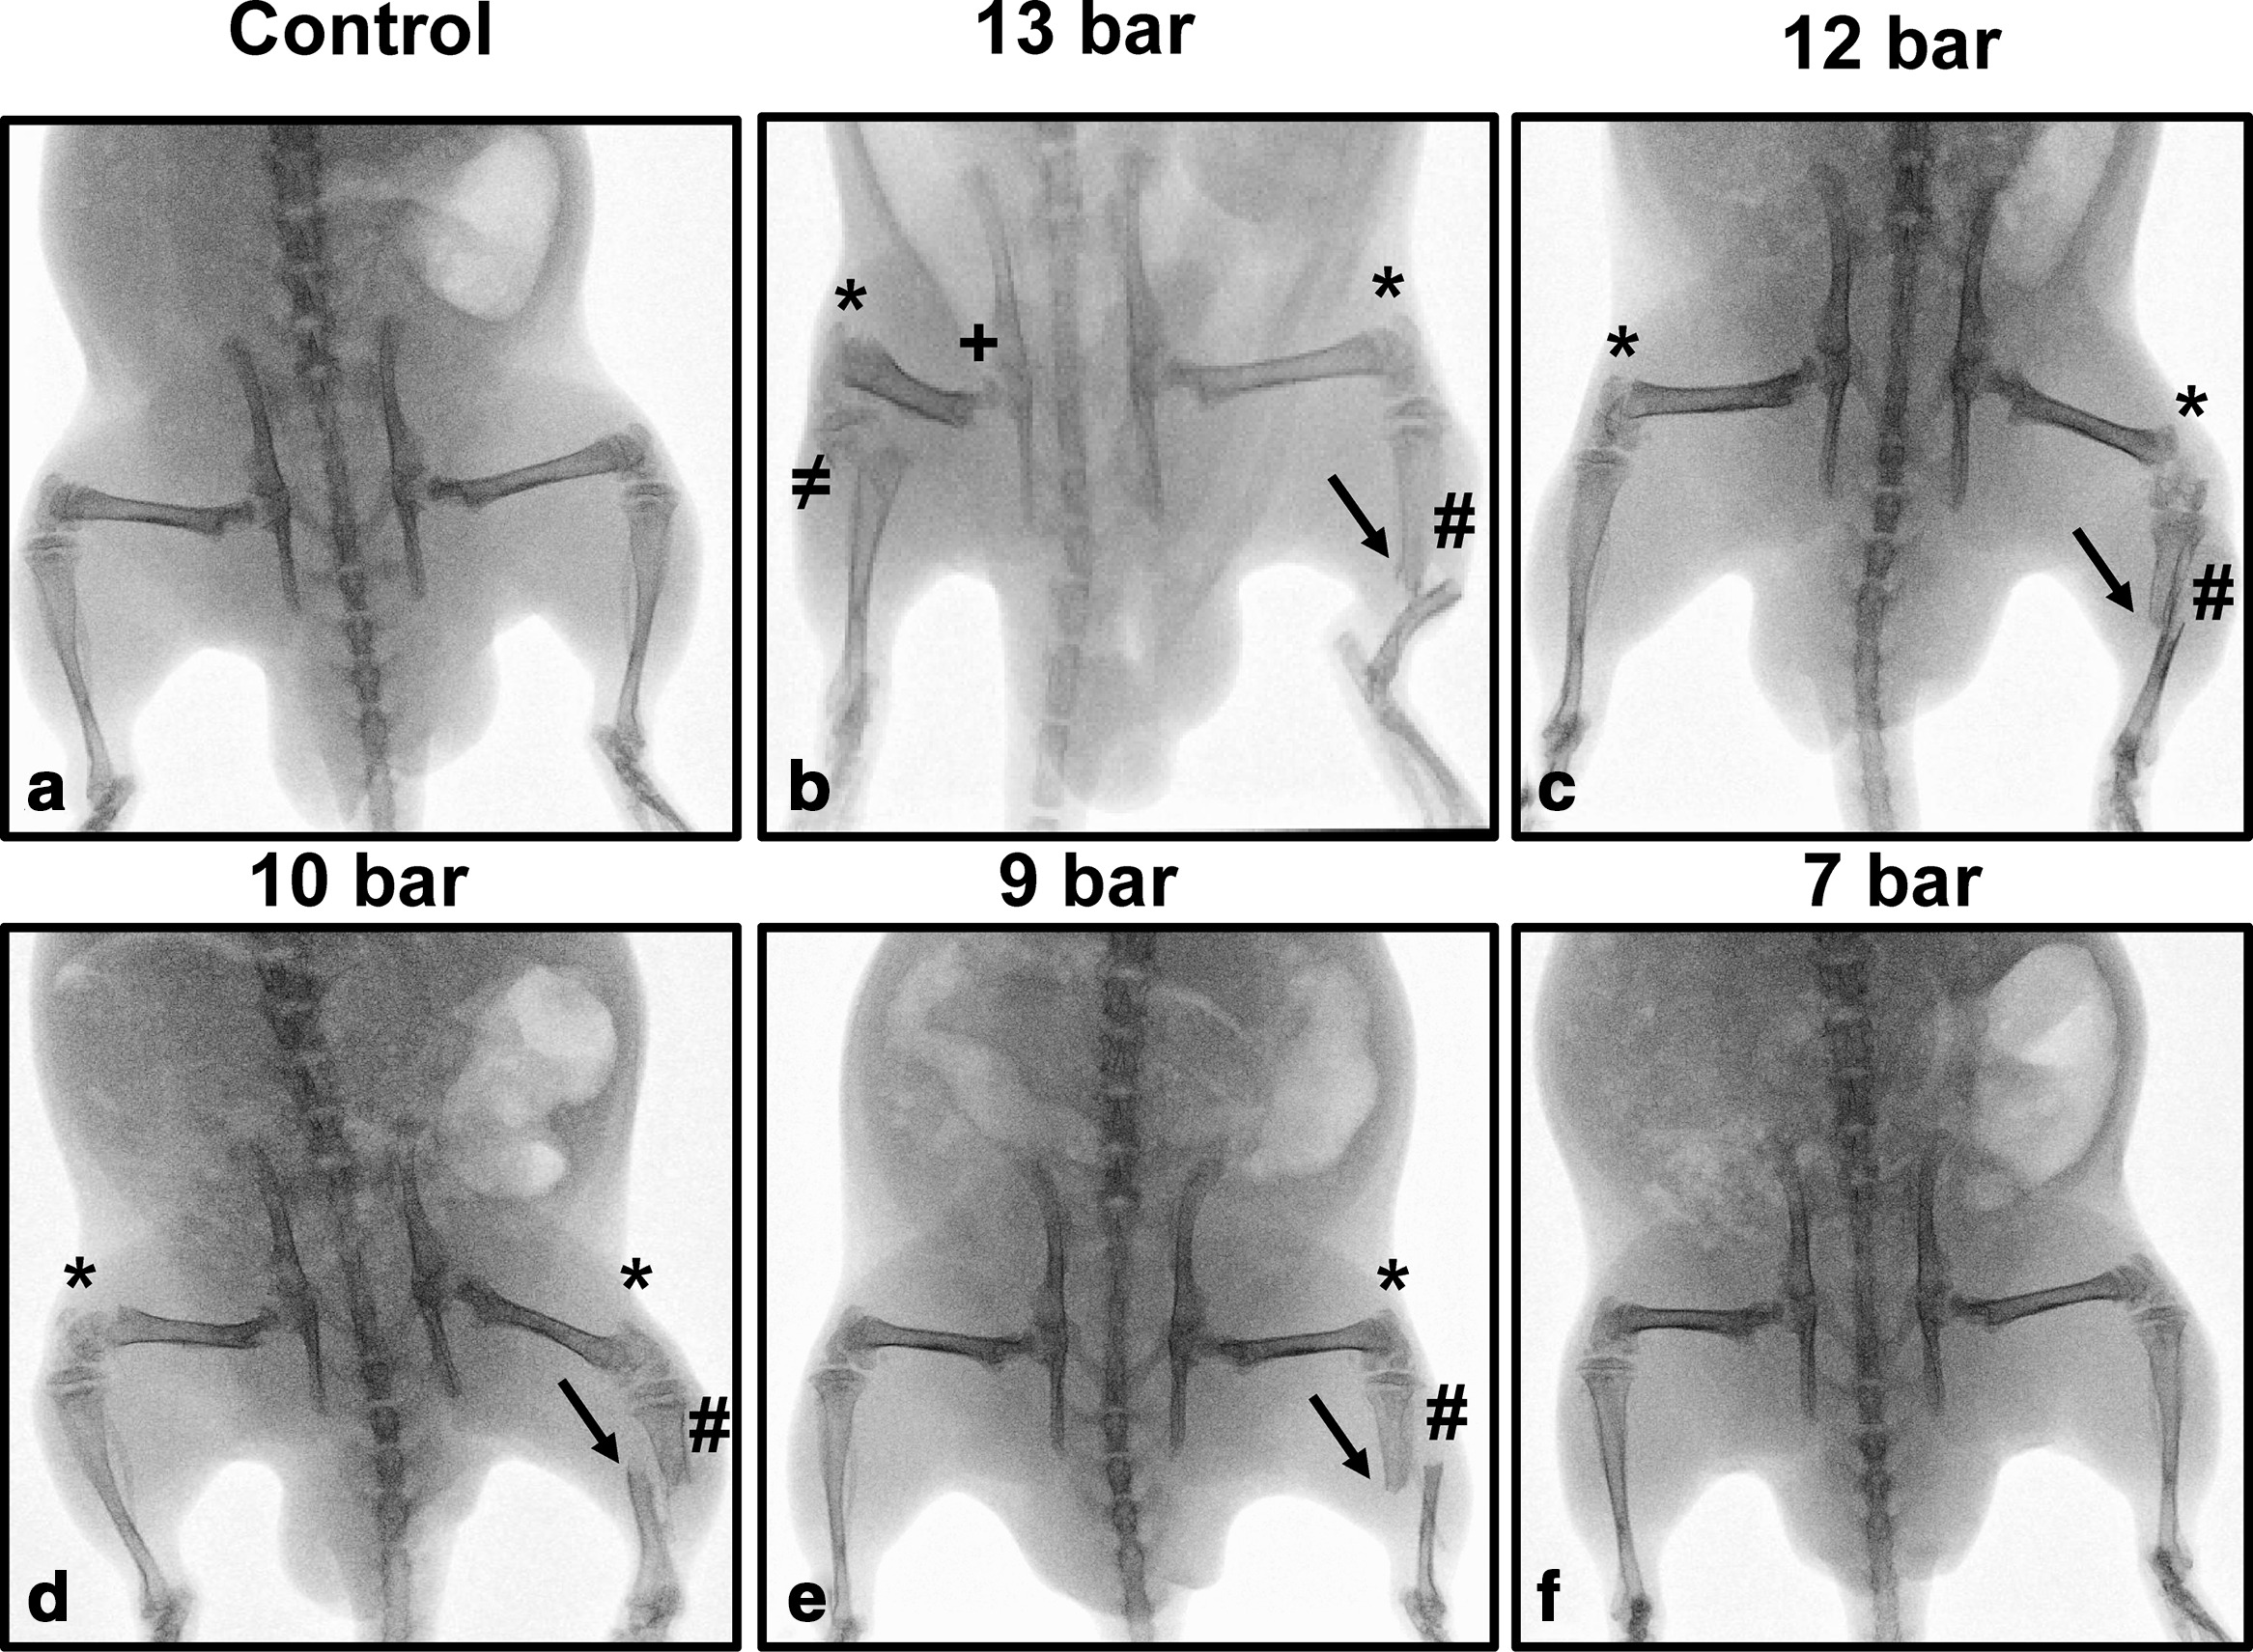 Fig. 3 
            Representative radiographs at each level of burst pressures. Dorsal capture of: a) control (intact rat); b) 13 bar; c) 12 bar; d) 10 bar; e) 9 bar; and f) 7 bar burst pressure. Fractures are annotated as follows: +hip fracture; ≠below-knee fracture; *above knee fracture; and #tibial fracture at the intended site (left hindlimb), also indicated by arrows.
          